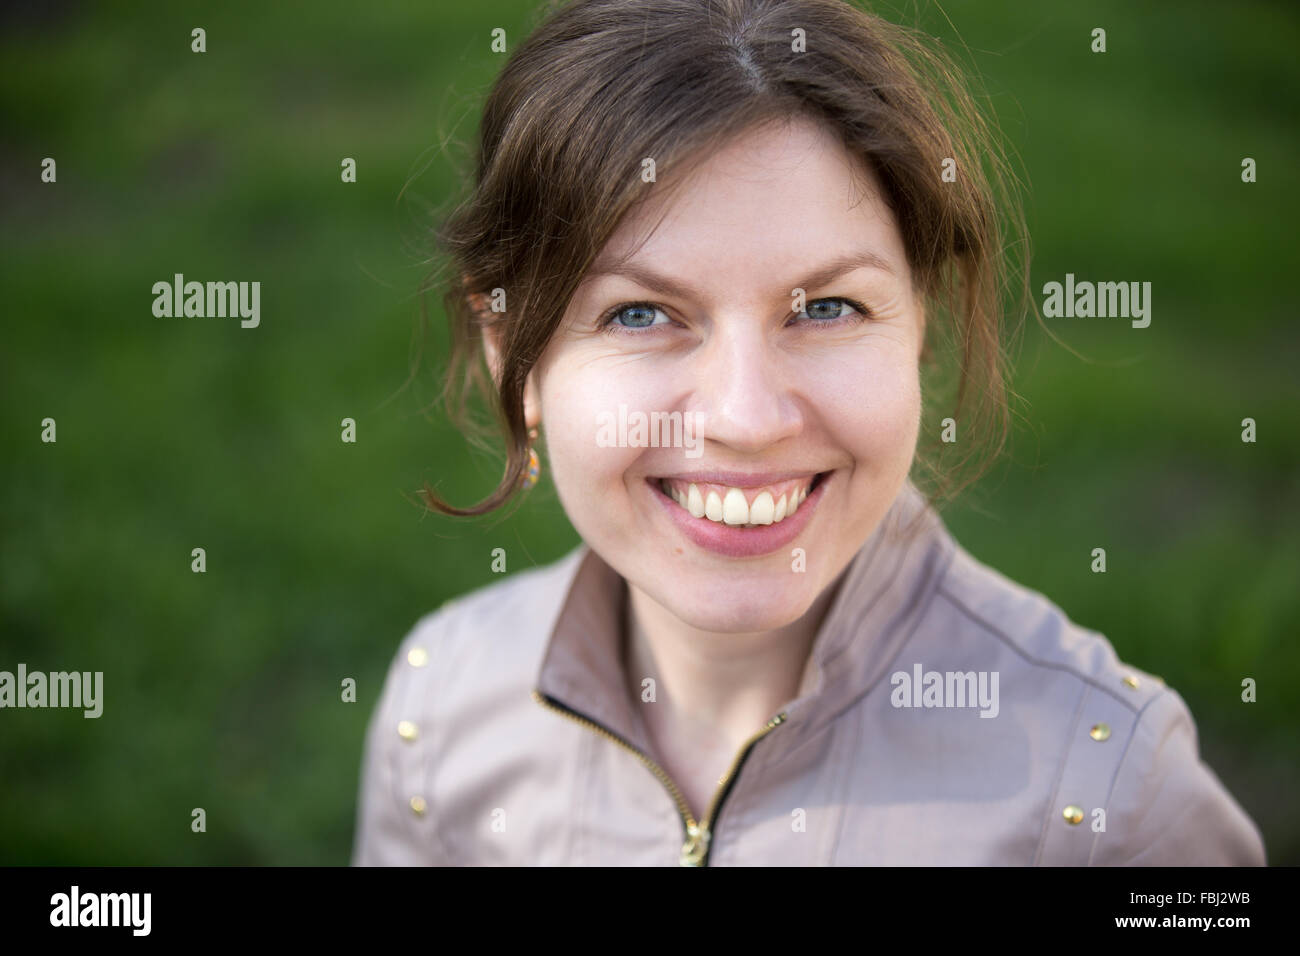 Headshot portrait of happy smiling woman in park Stock Photo